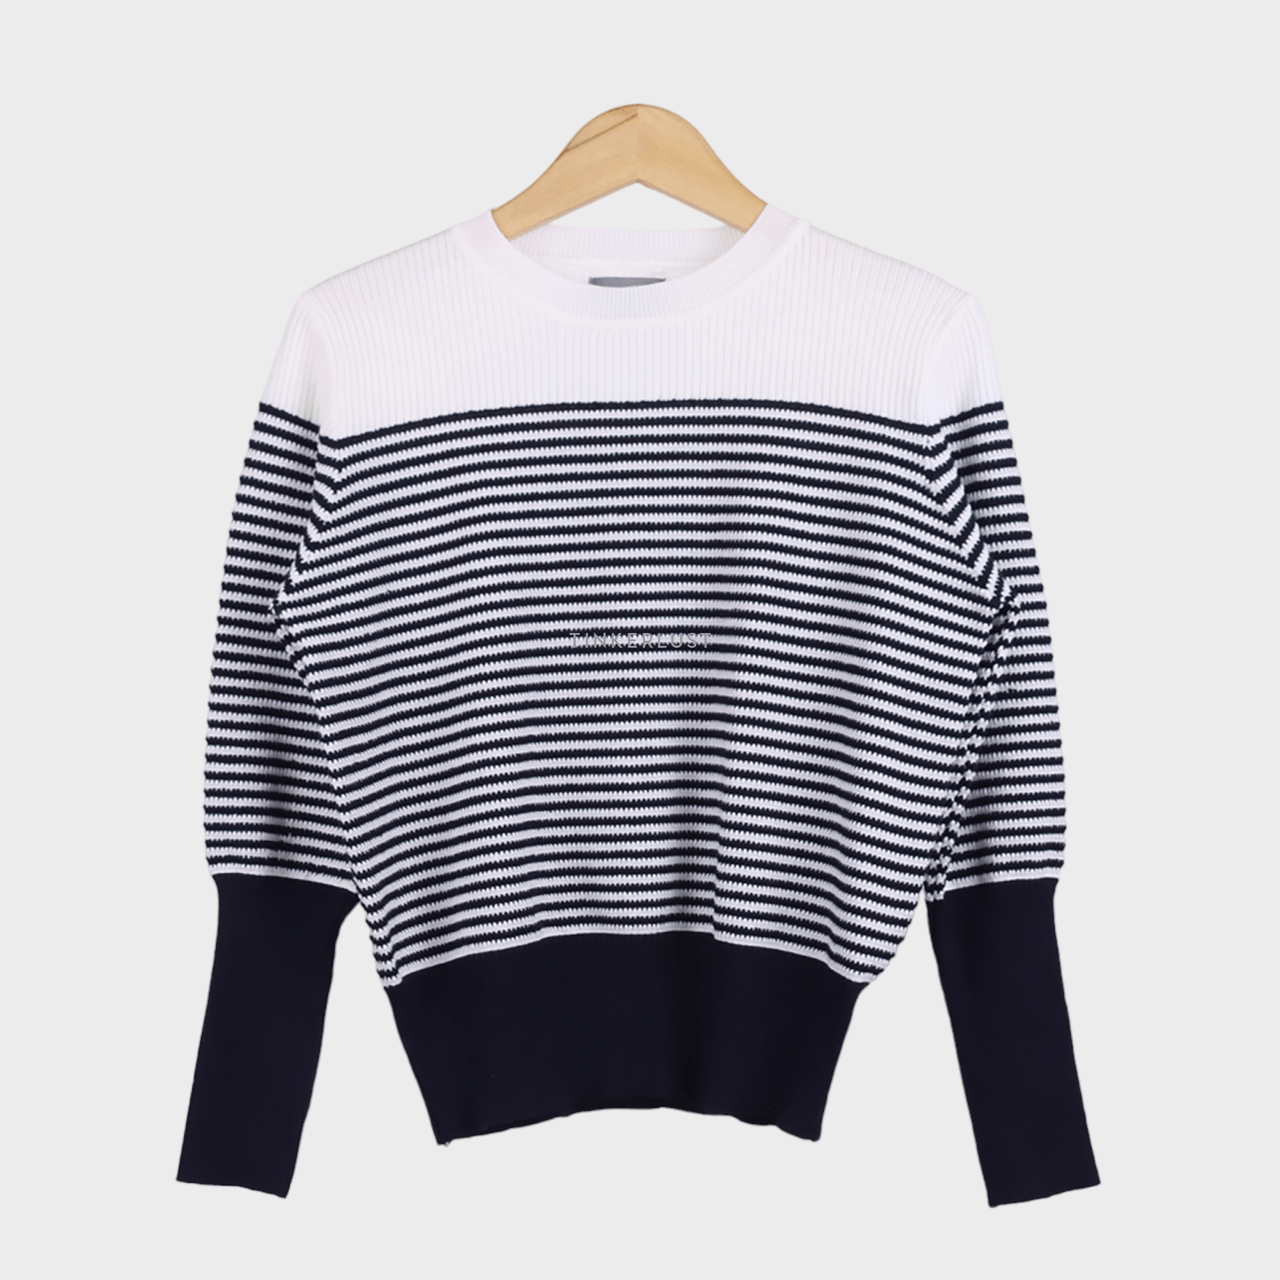 This is April Navy & White Stripes Sweater